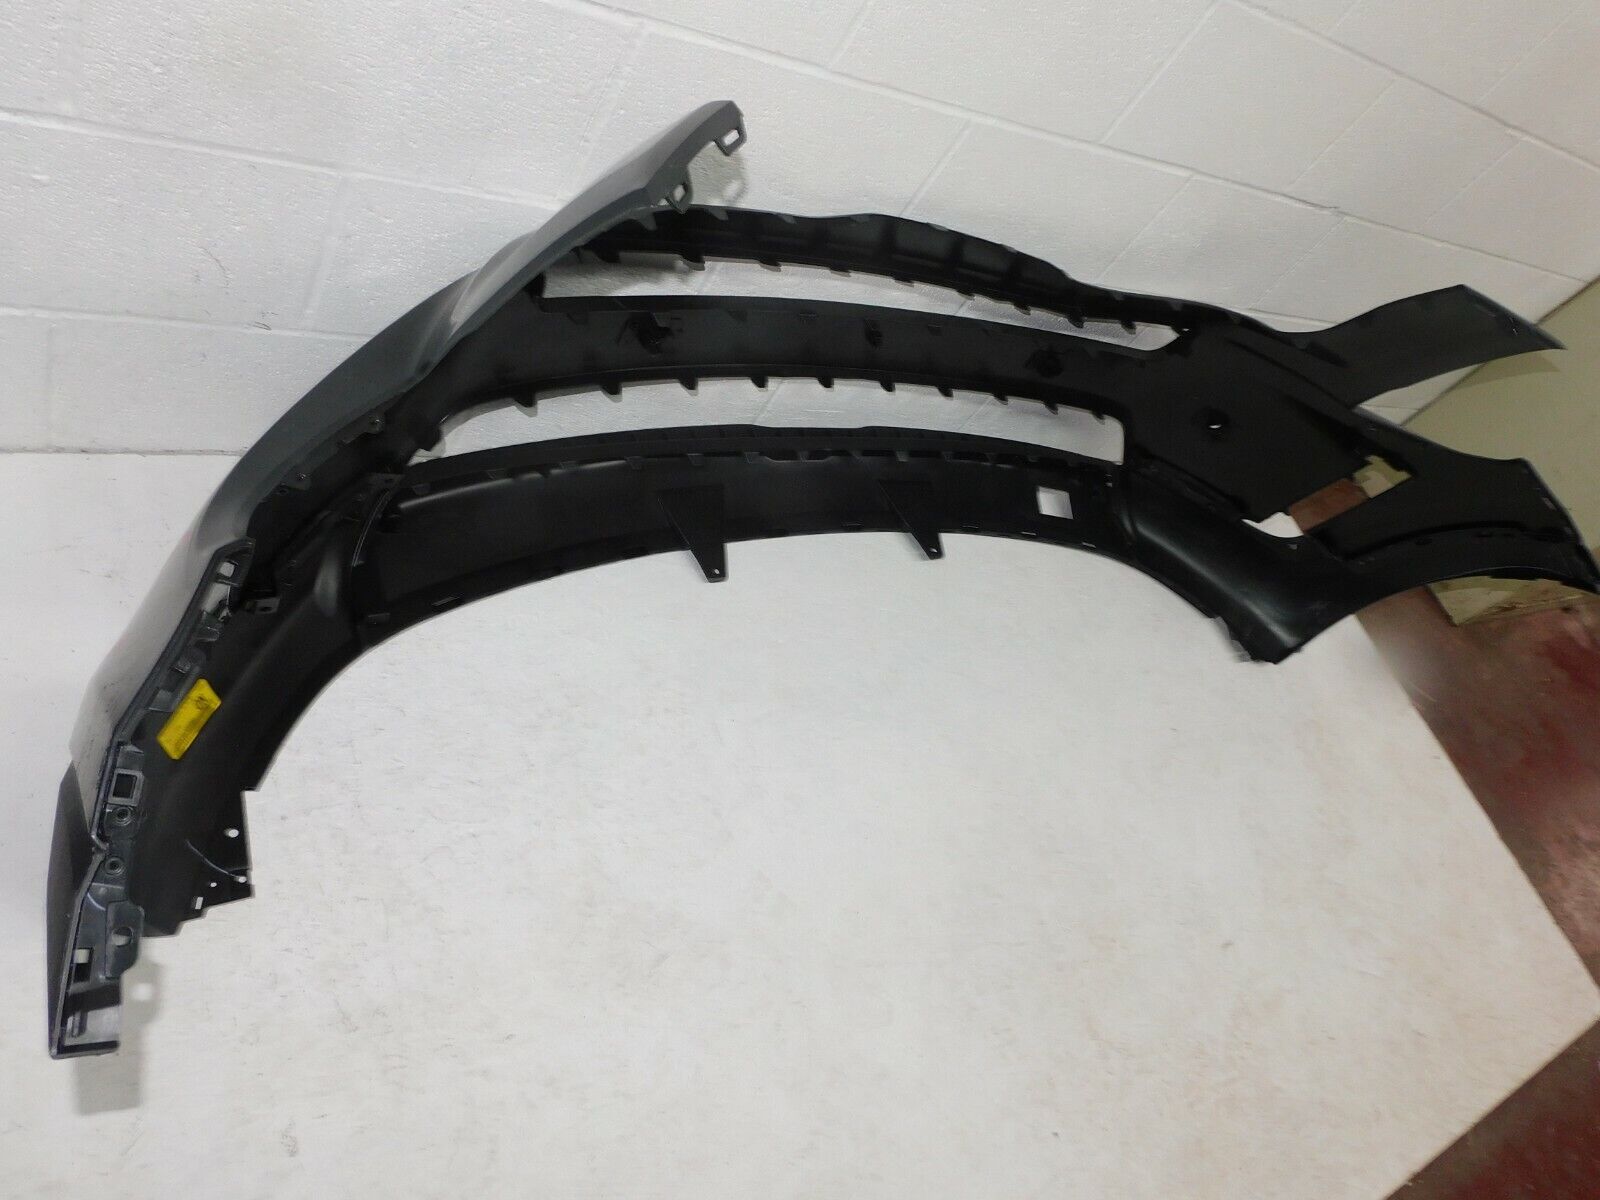 Used 2020 2022 Kia Telluride Front Bumper Cover Oem With Sensor Holes For Sale 86511 S9000 0067